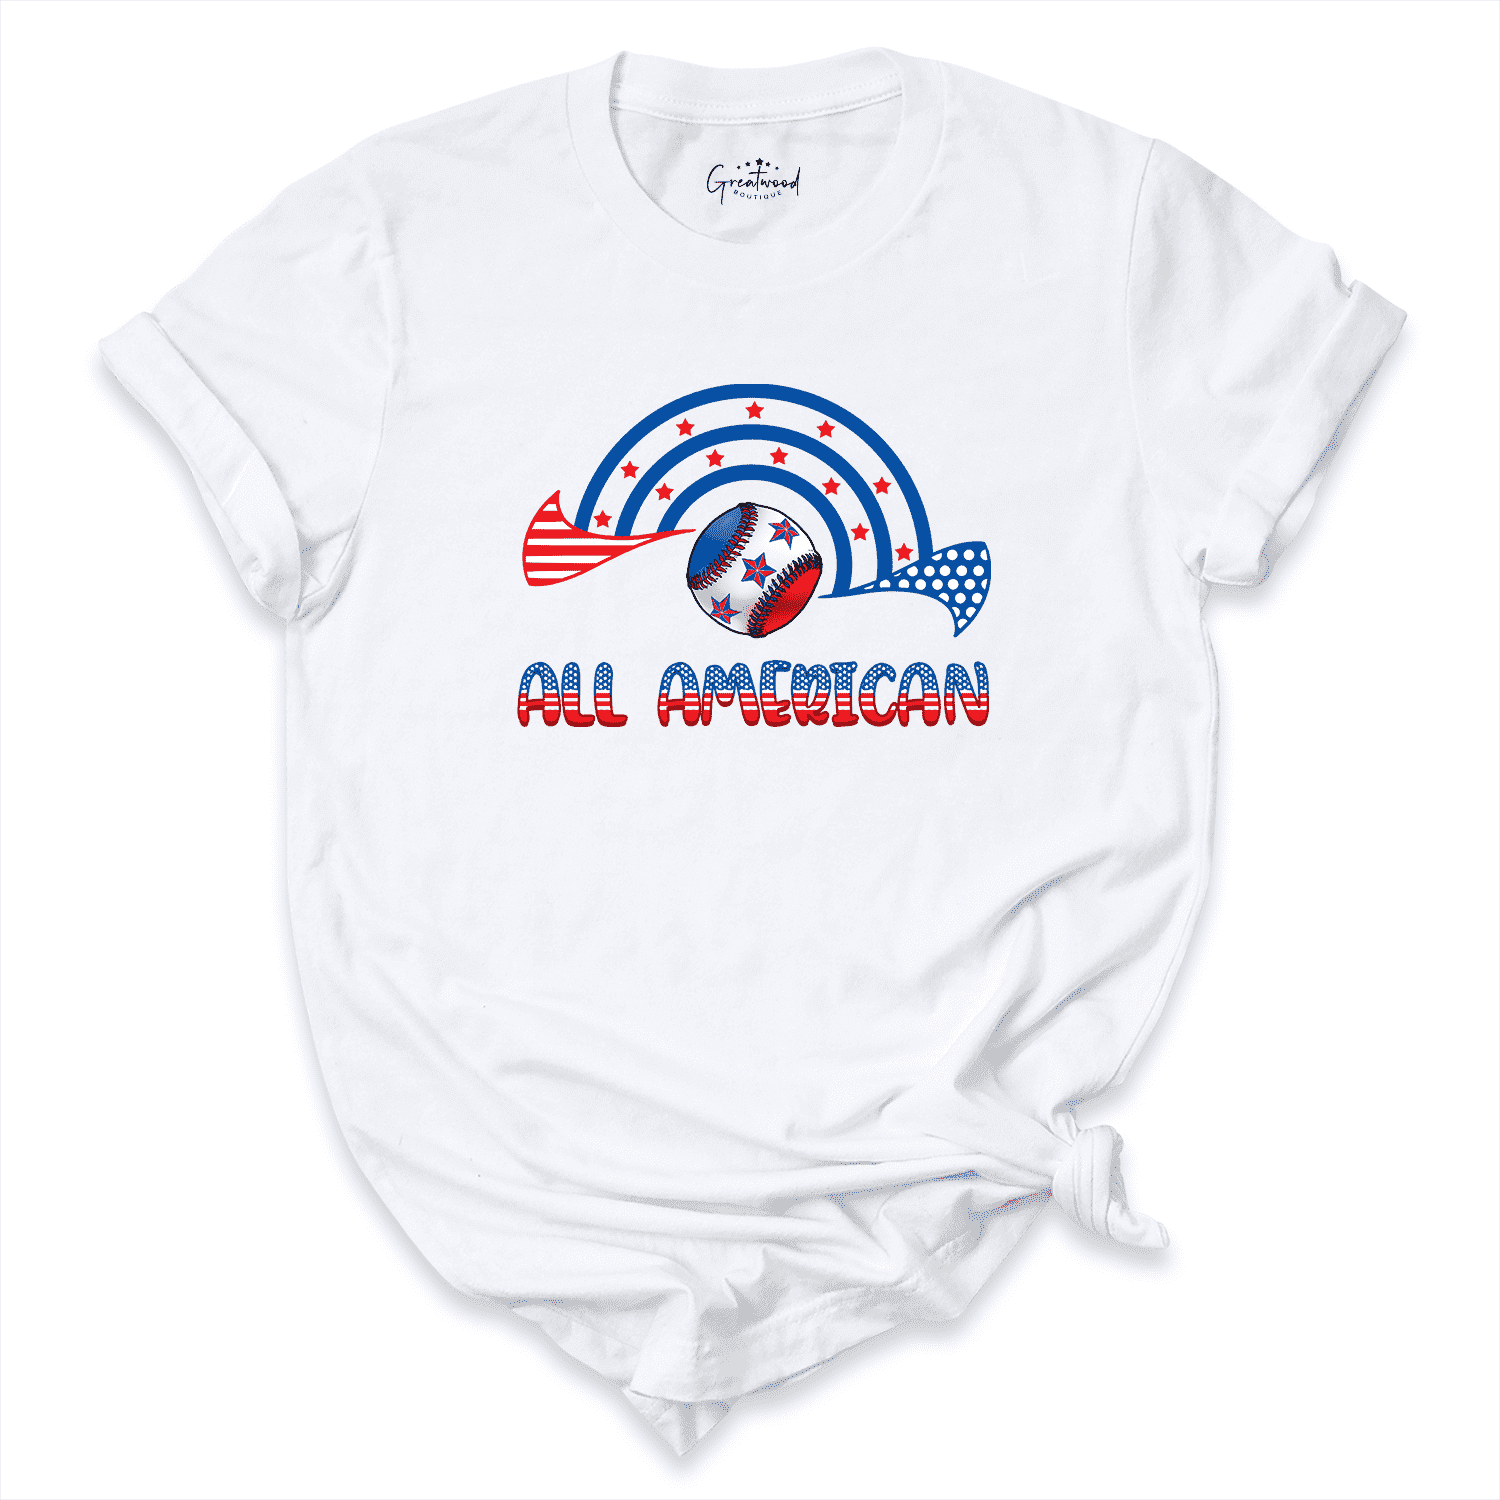 All American Baseball Shirt White - Greatwood Boutique